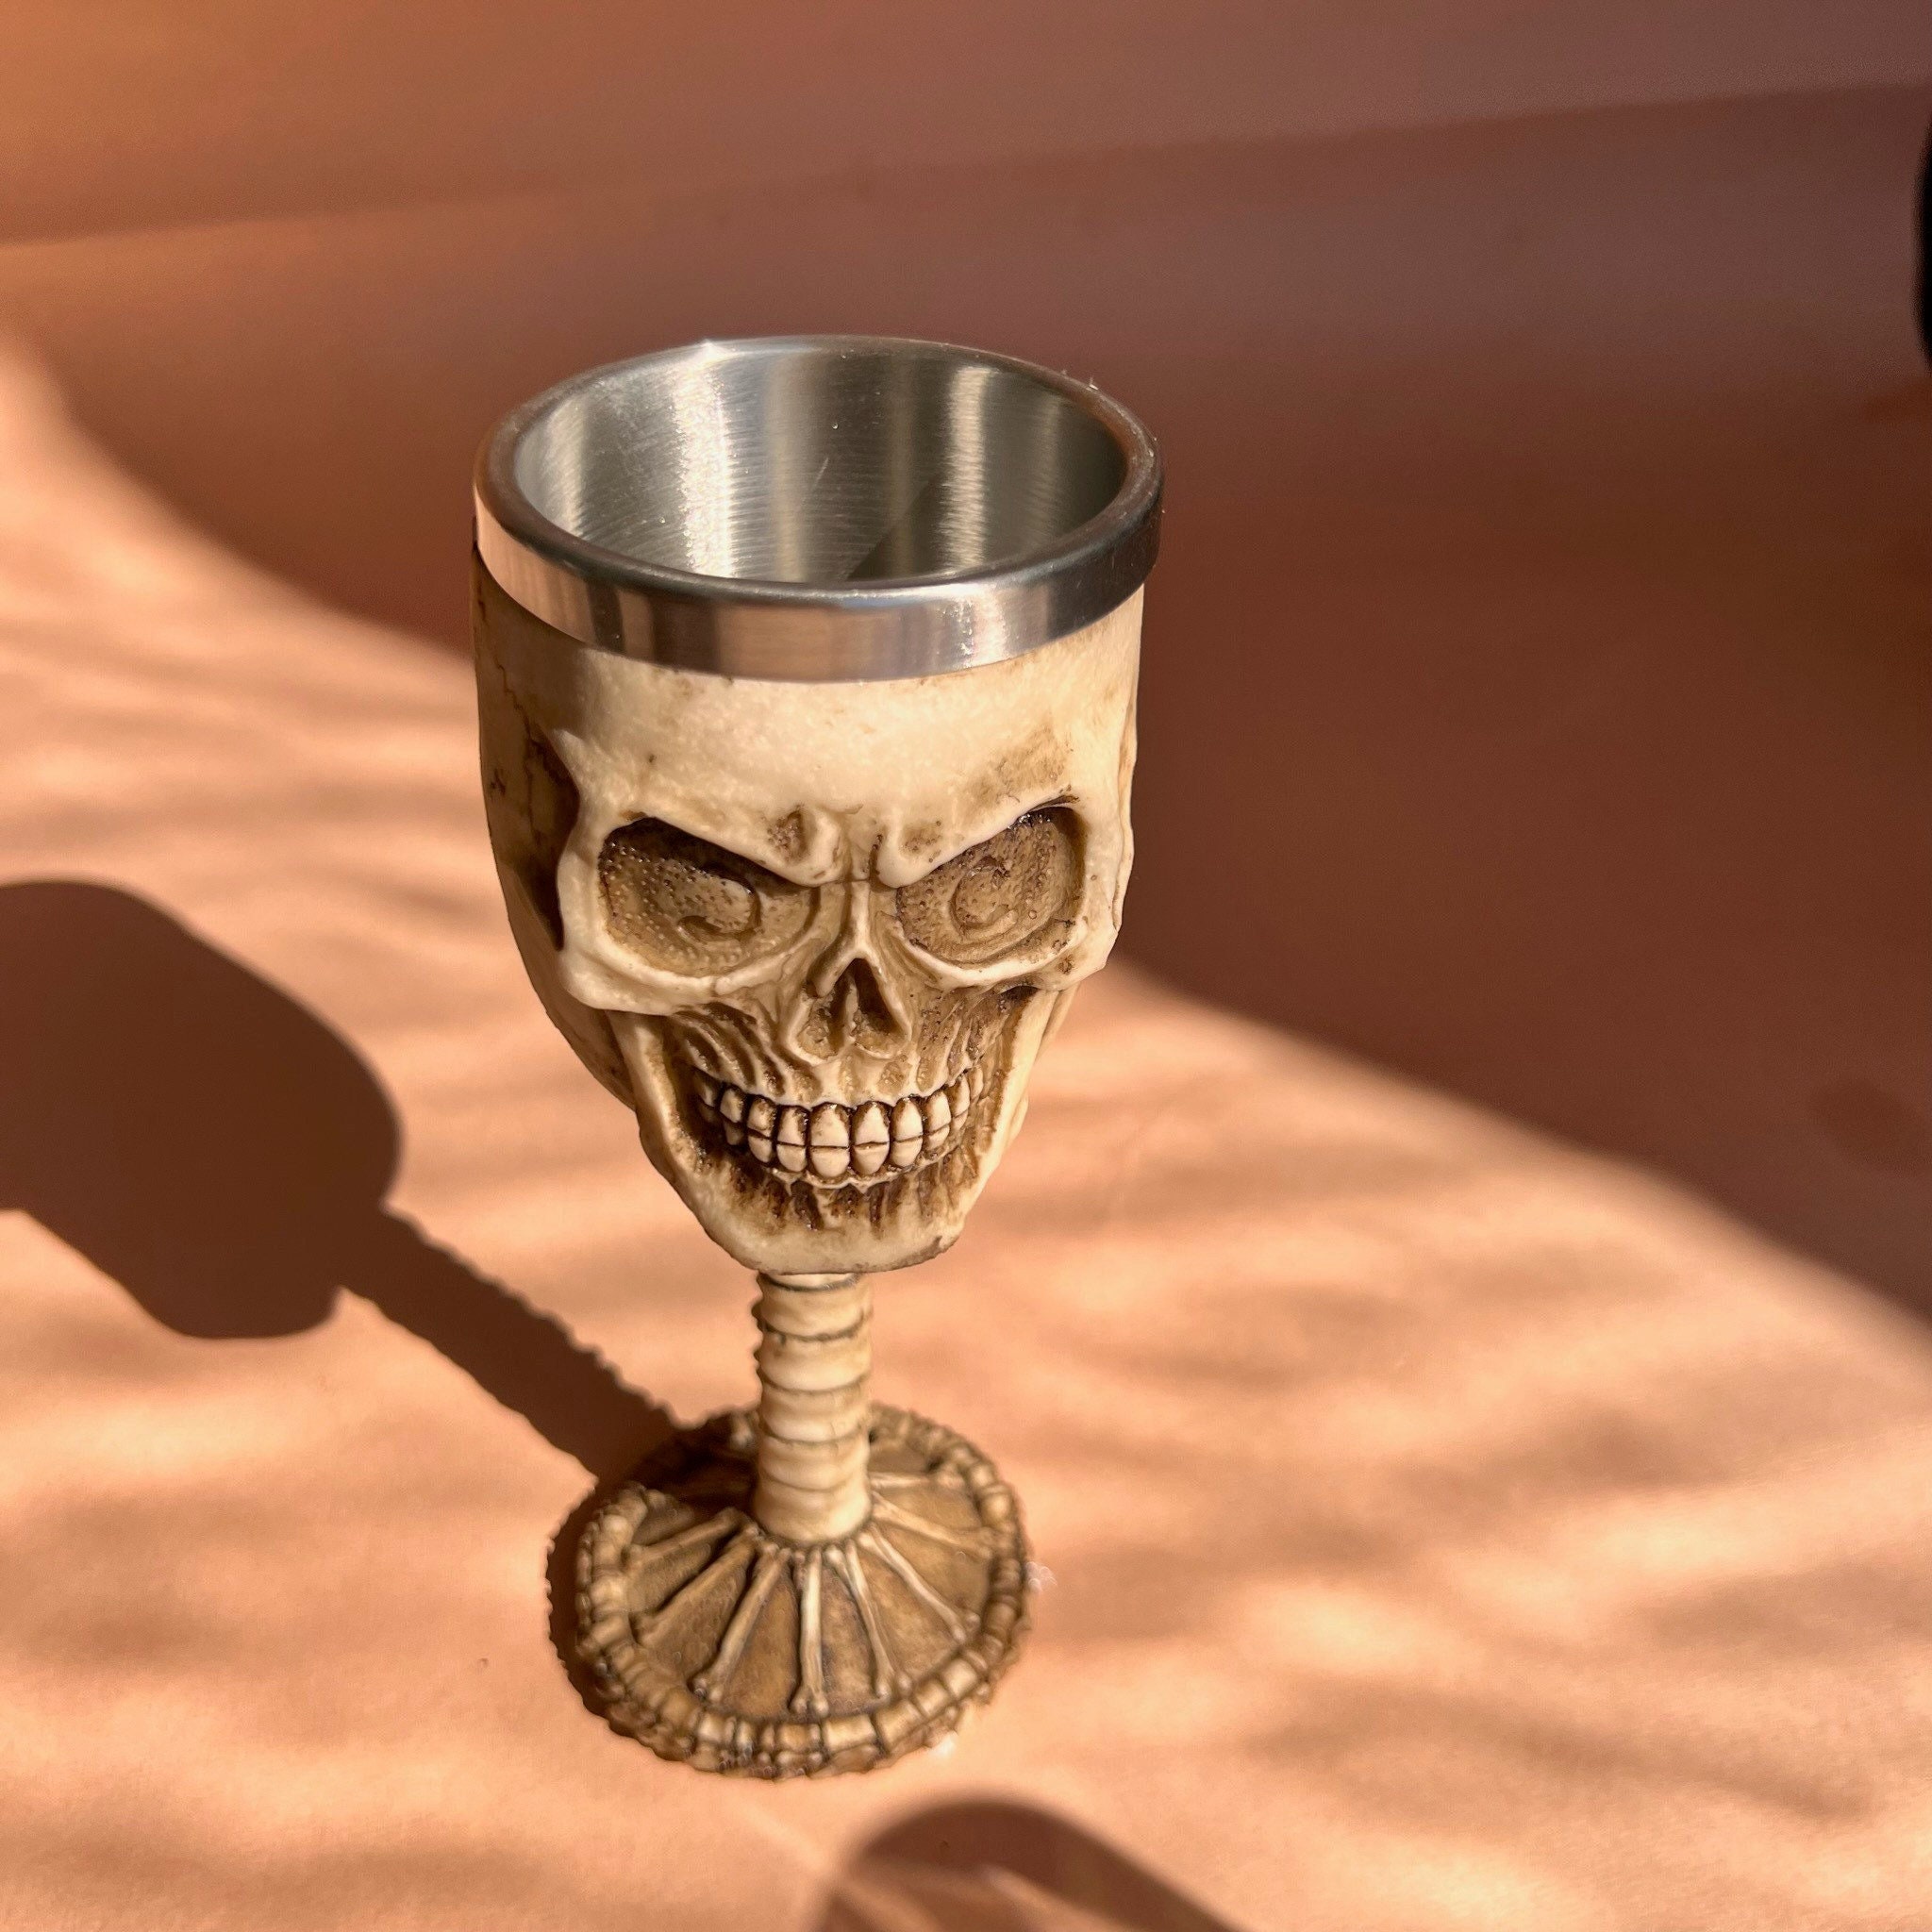 Spooky Skull Goblet Halloween Party Transparent Whiskey Glass Cool Drinking  Cup